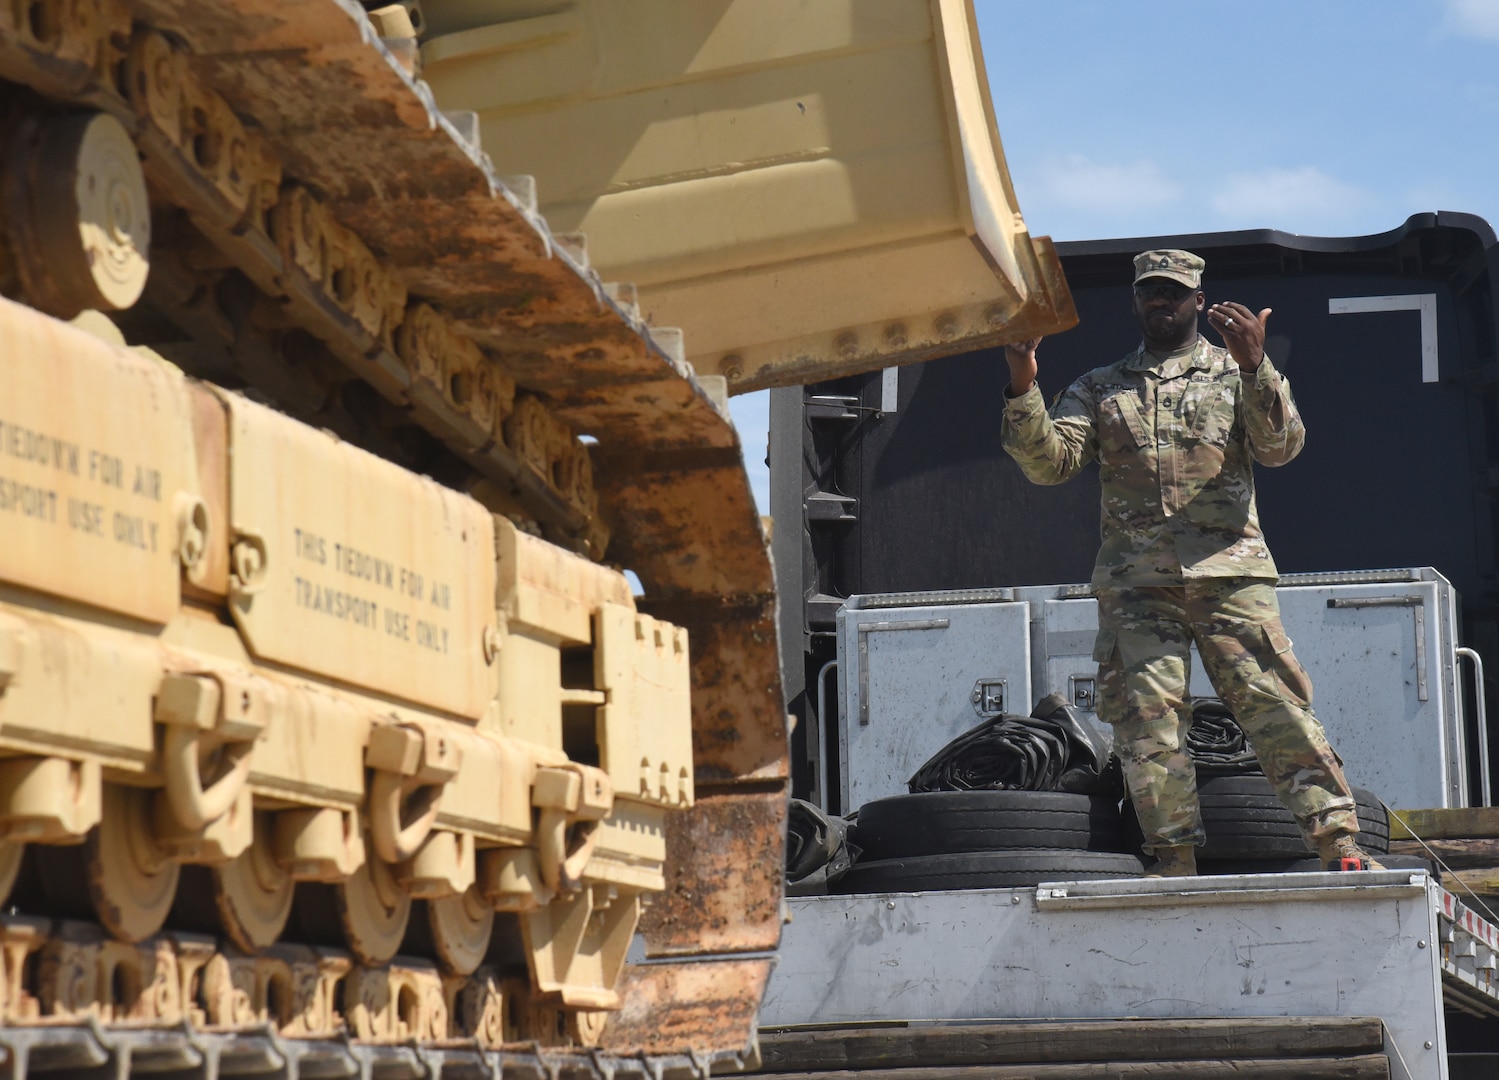 Virginia National Guard Soldiers load a bulldozer onto a trailer for transport July 9, 2021, at Fort Pickett, Virginia. The bulldozer is part of the heavy equipment the 180th Engineer Company, 276th Engineer Battalion, 329th Regional Support Group, is using during a training rotation July 10-Aug. 3, 2021, at the Joint Readiness Training Center in Fort Polk, Louisiana.